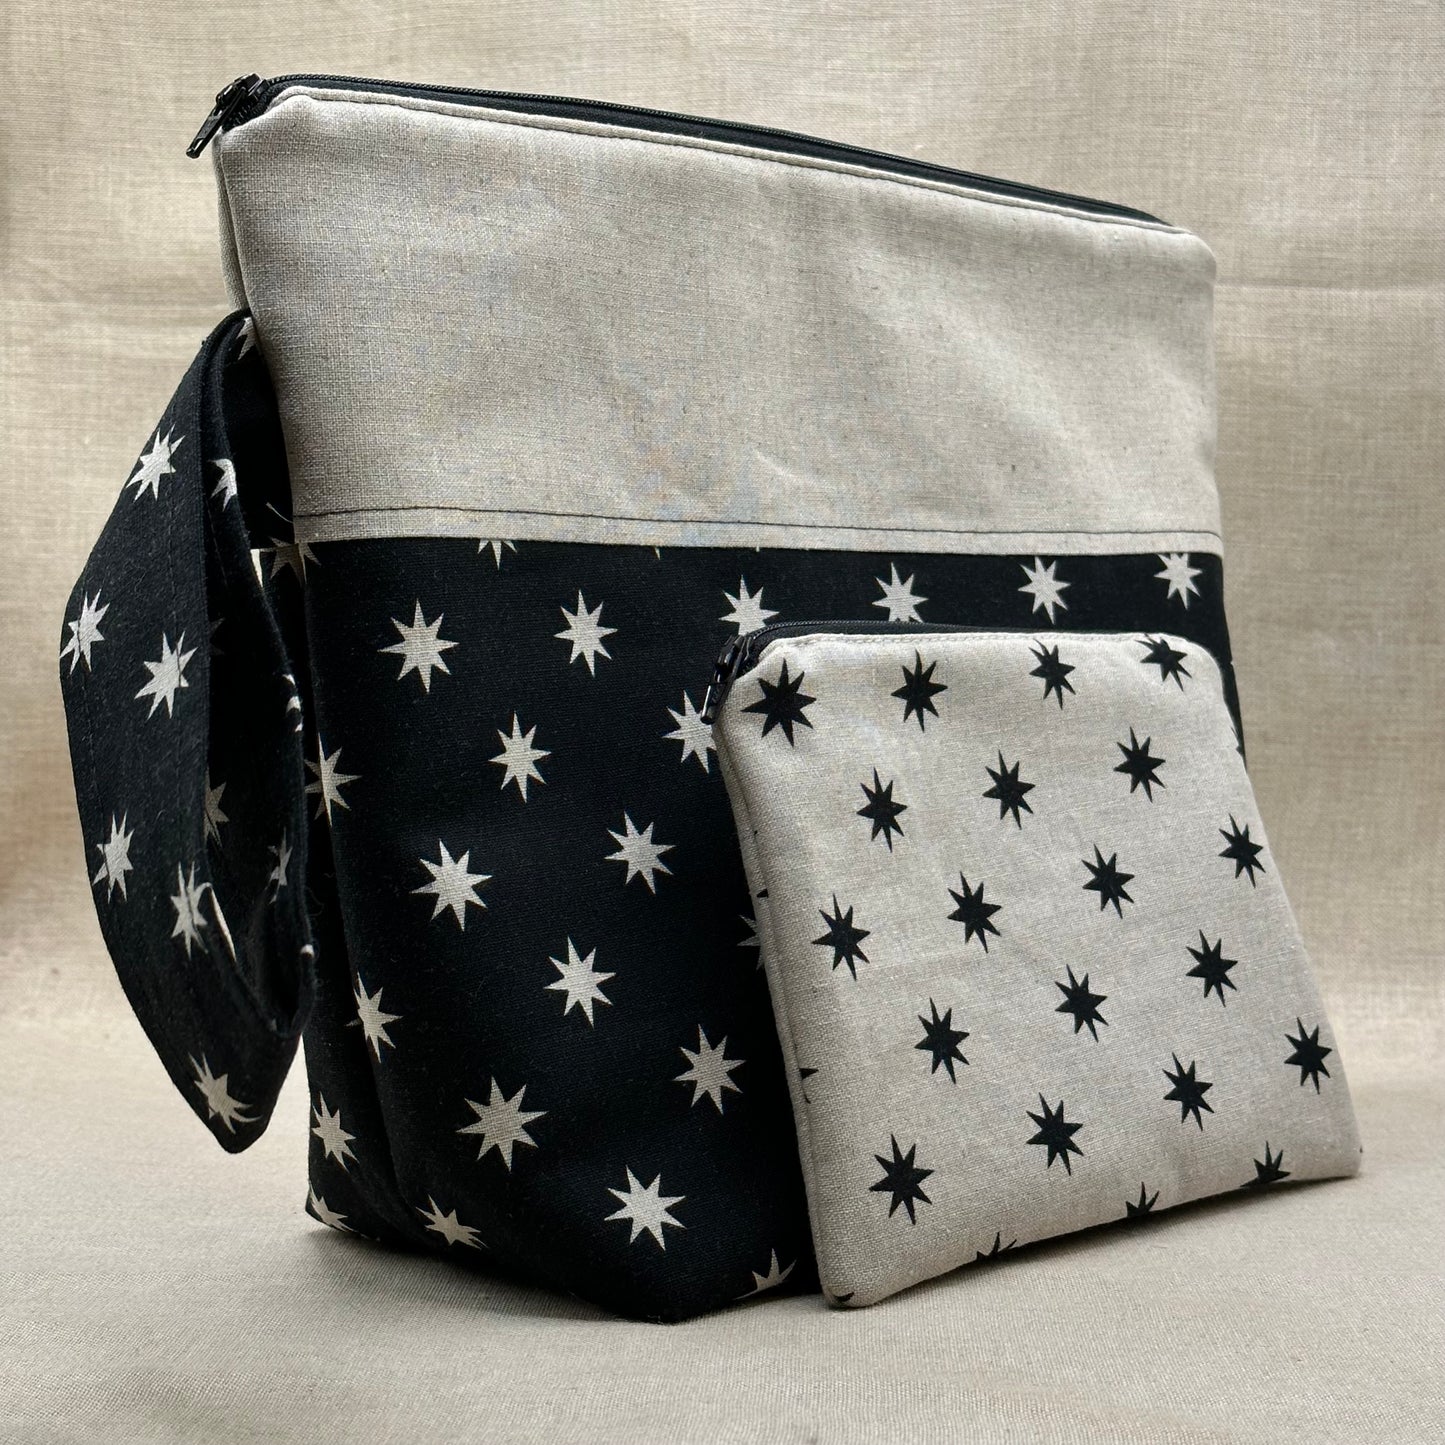 Stars Aligned - Project Bag with Coordinating Notions Pouch